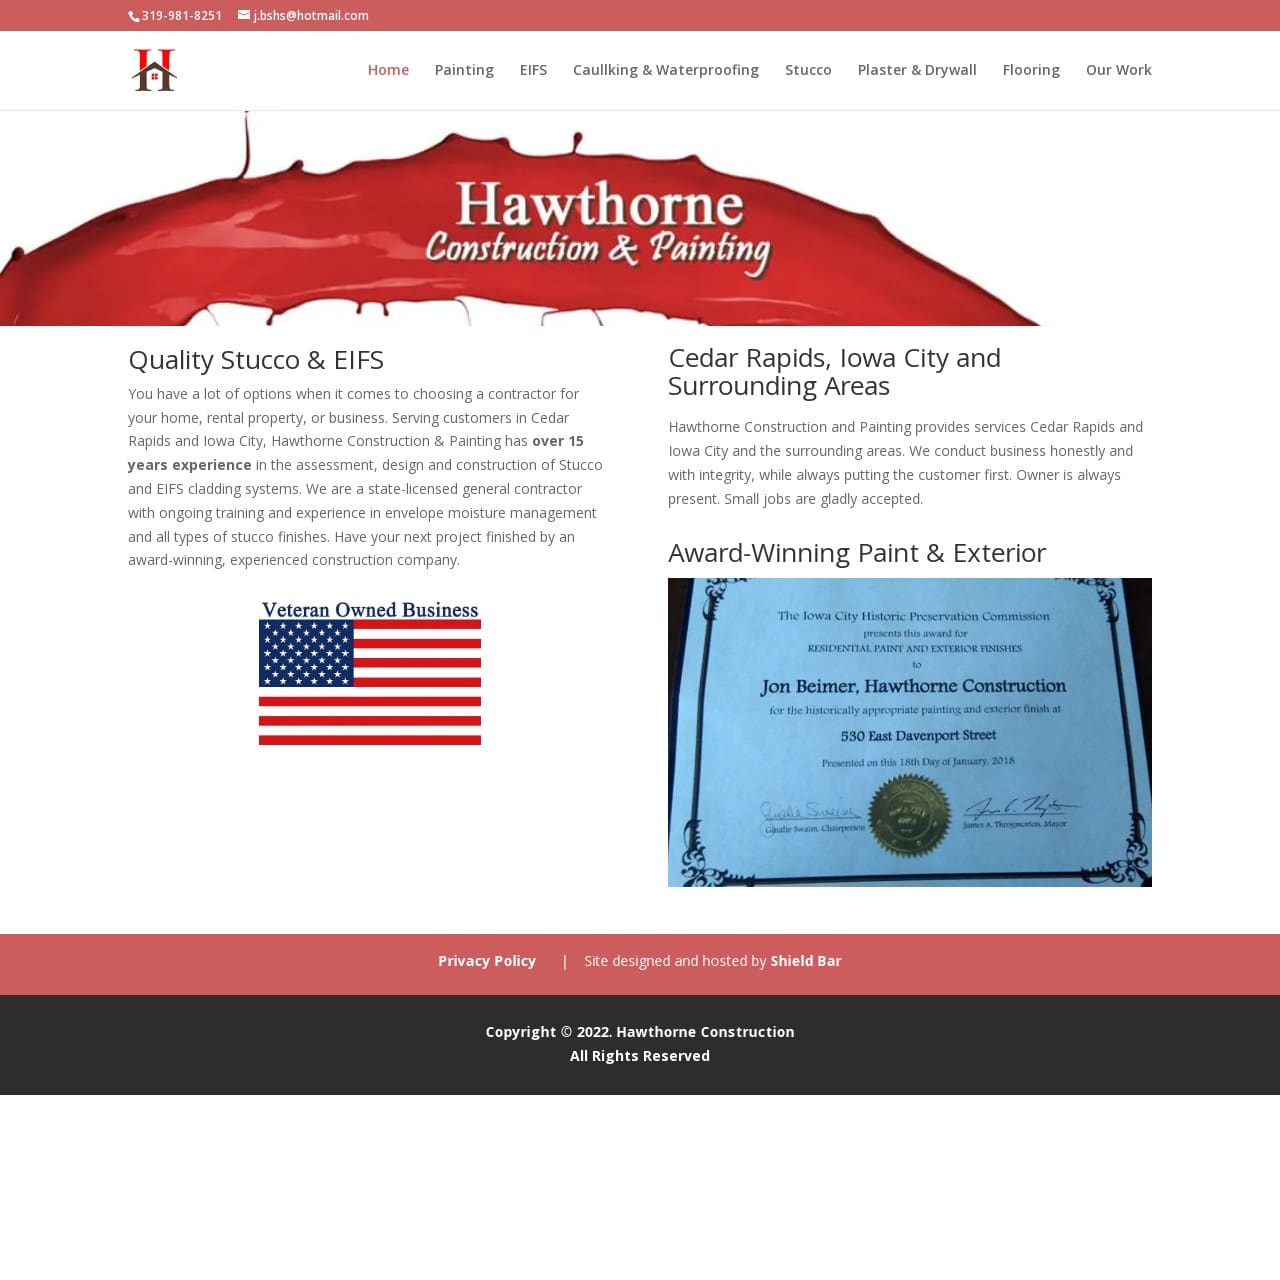 Journey with us as Shield Bar Marketing supports the growth of Hawthorne Construction, creating an impactful online presence that showcases Jon's expertise and craftsmanship, paving the way for success in the digital realm.